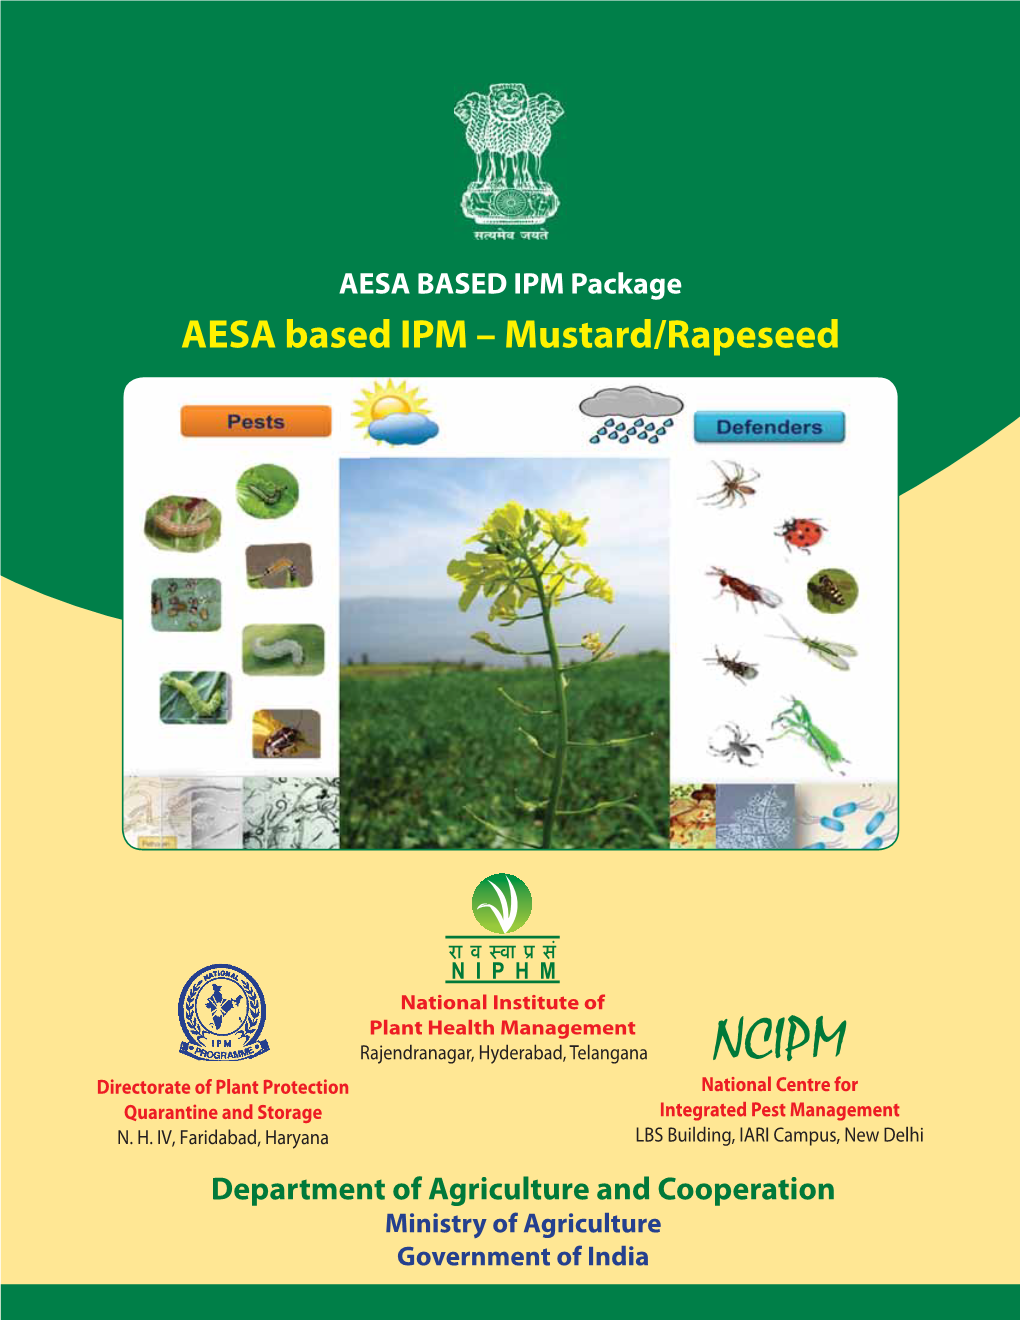 AESA Based IPM – Mustard/Rapeseed Important Natural Enemies of Mustard/Rapeseed Insect Pests